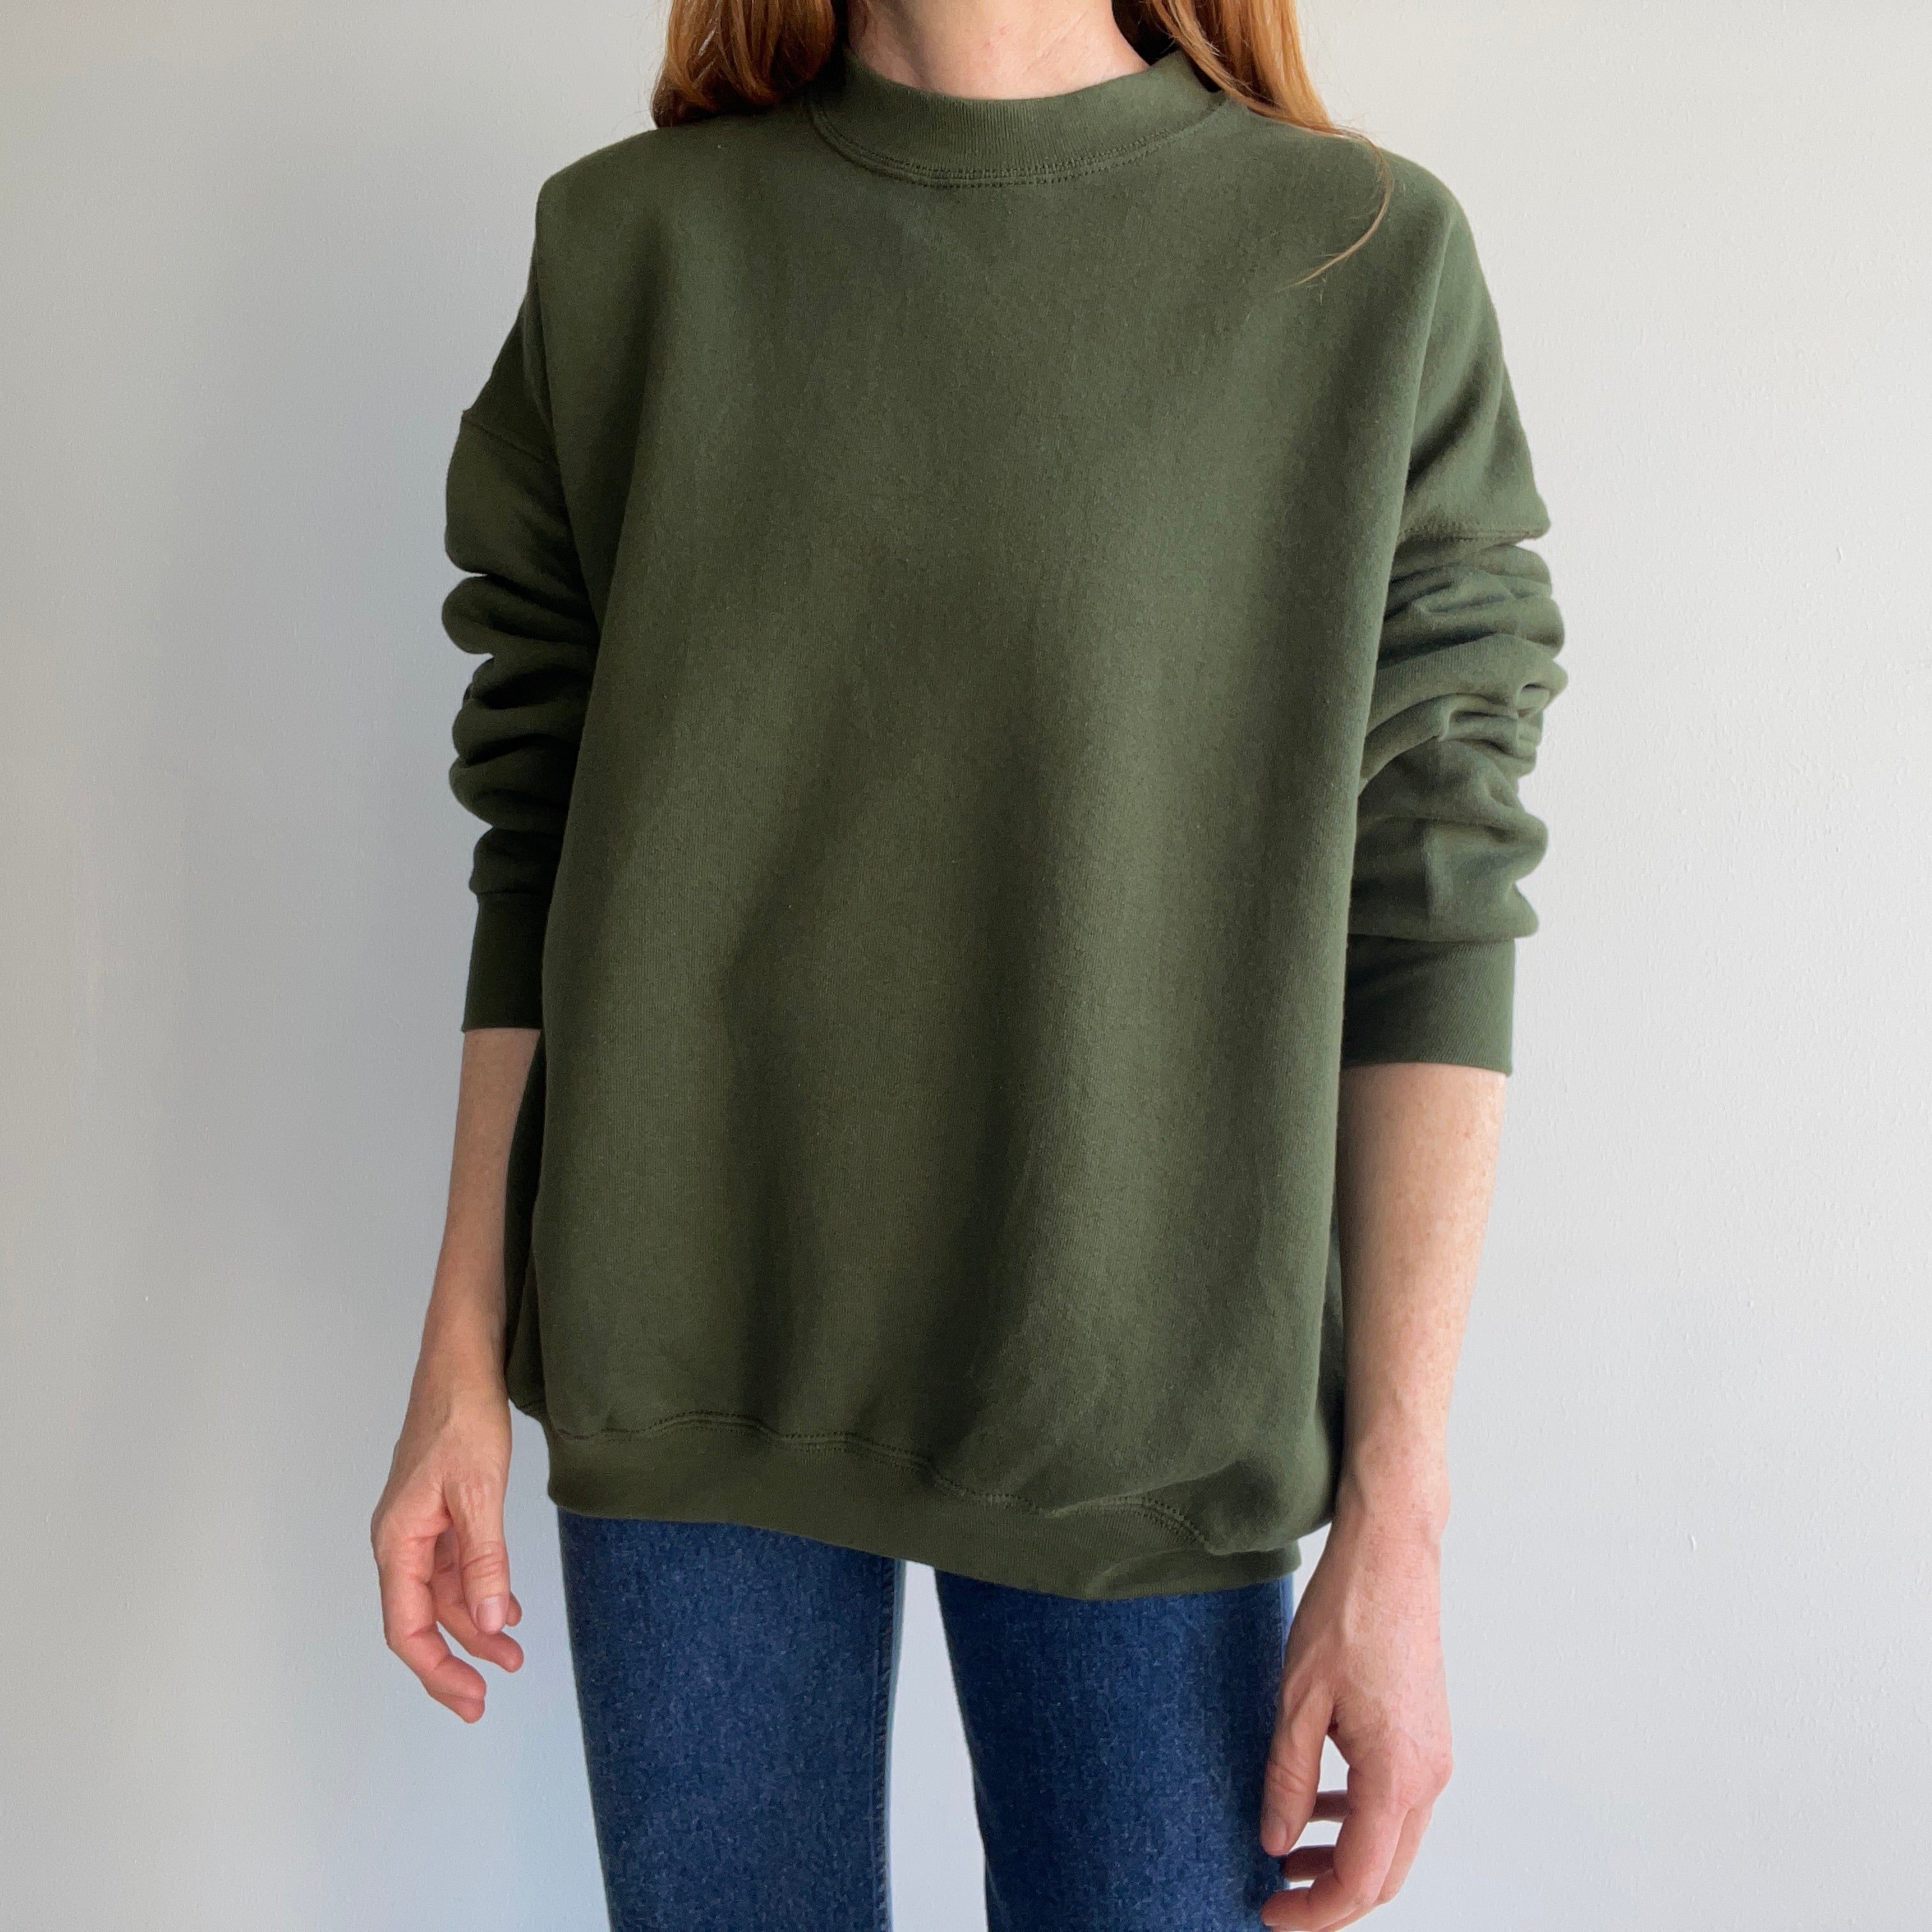 1980/90s Very Large and Boxy Olive Green Sweatshirt by FOTL